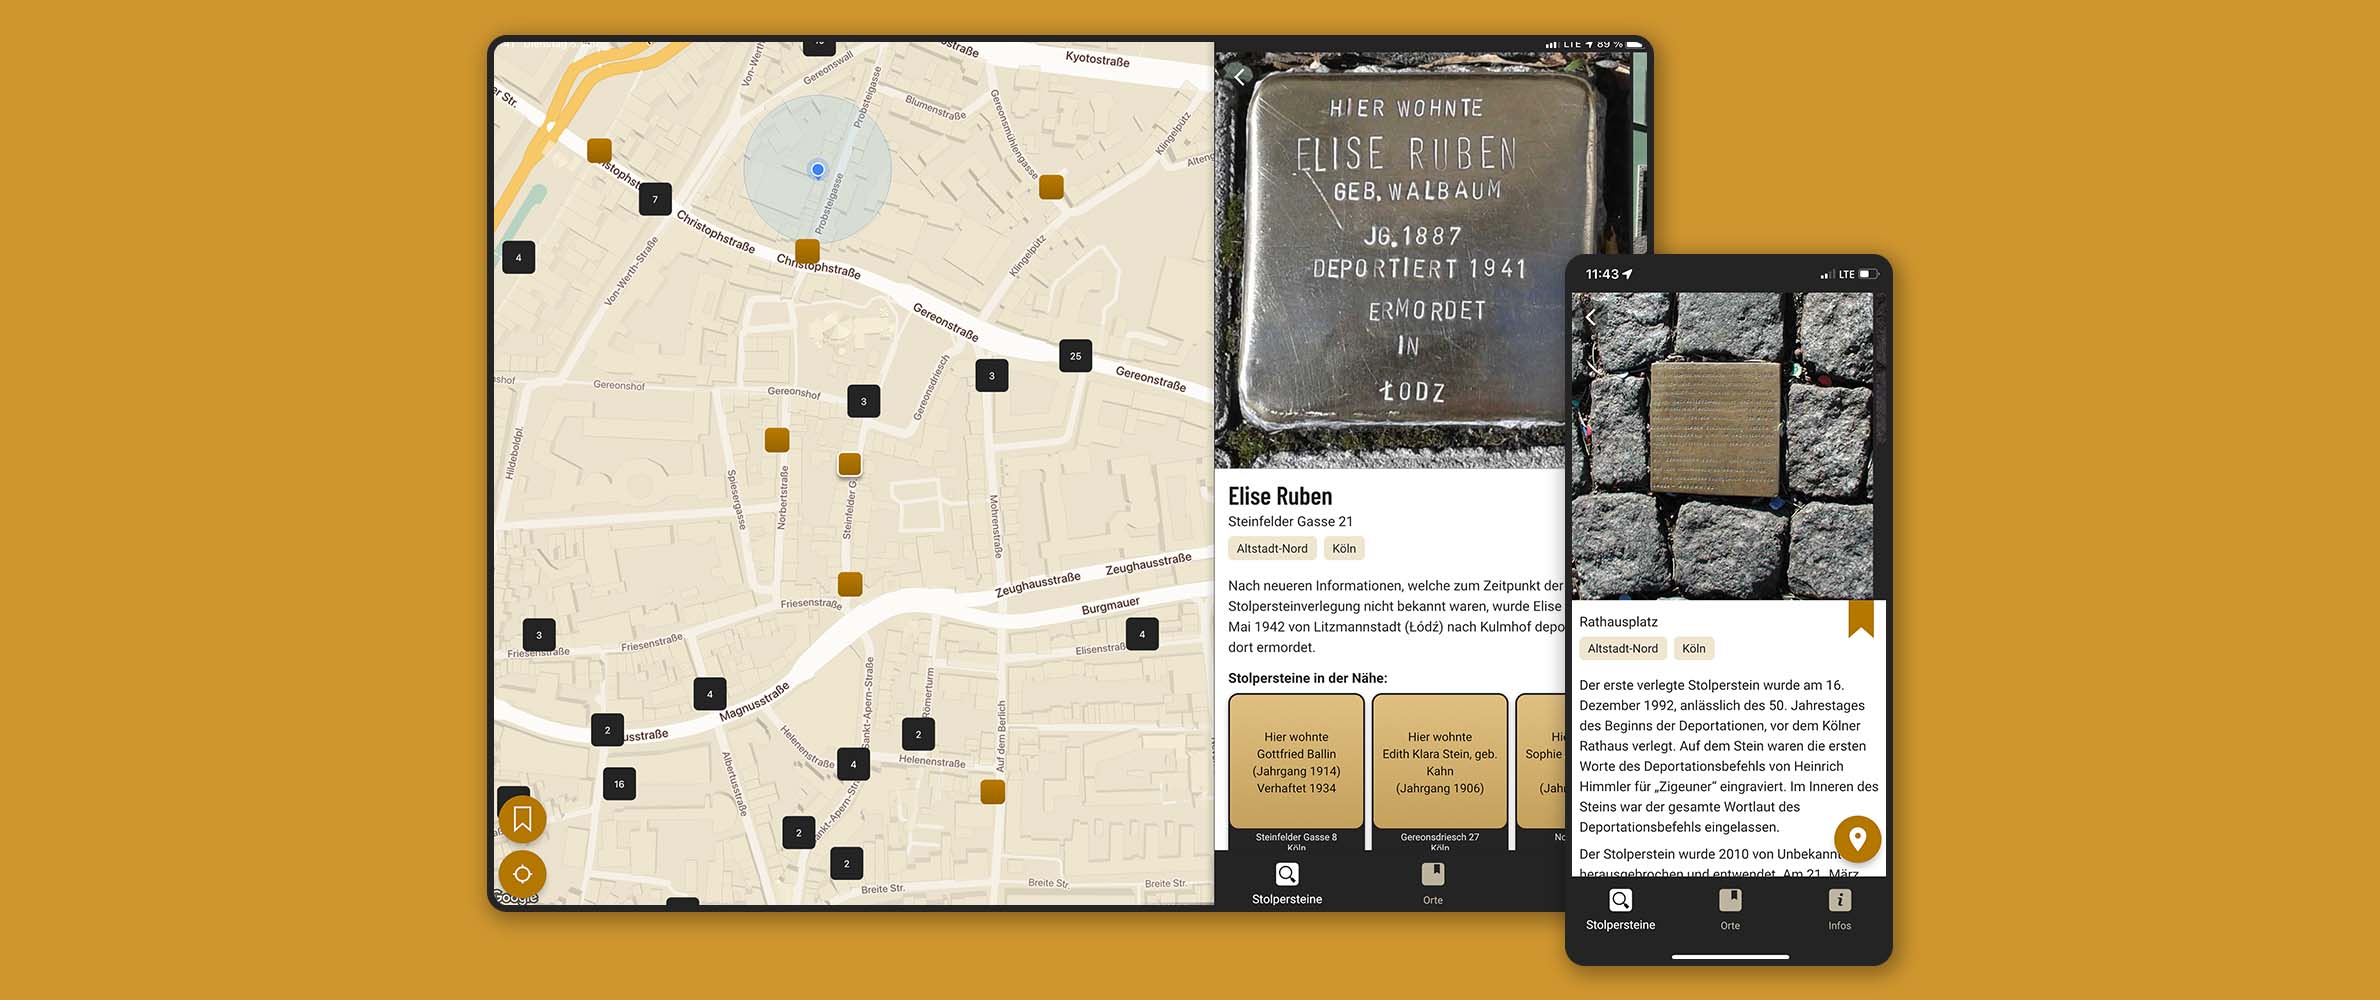 Screenshots of the app in tablet and smartphone view. They each show a photo of a stumbling block with a textual explanation. The tablet also shows a map of the surrounding area on which the stumbling blocks are marked.